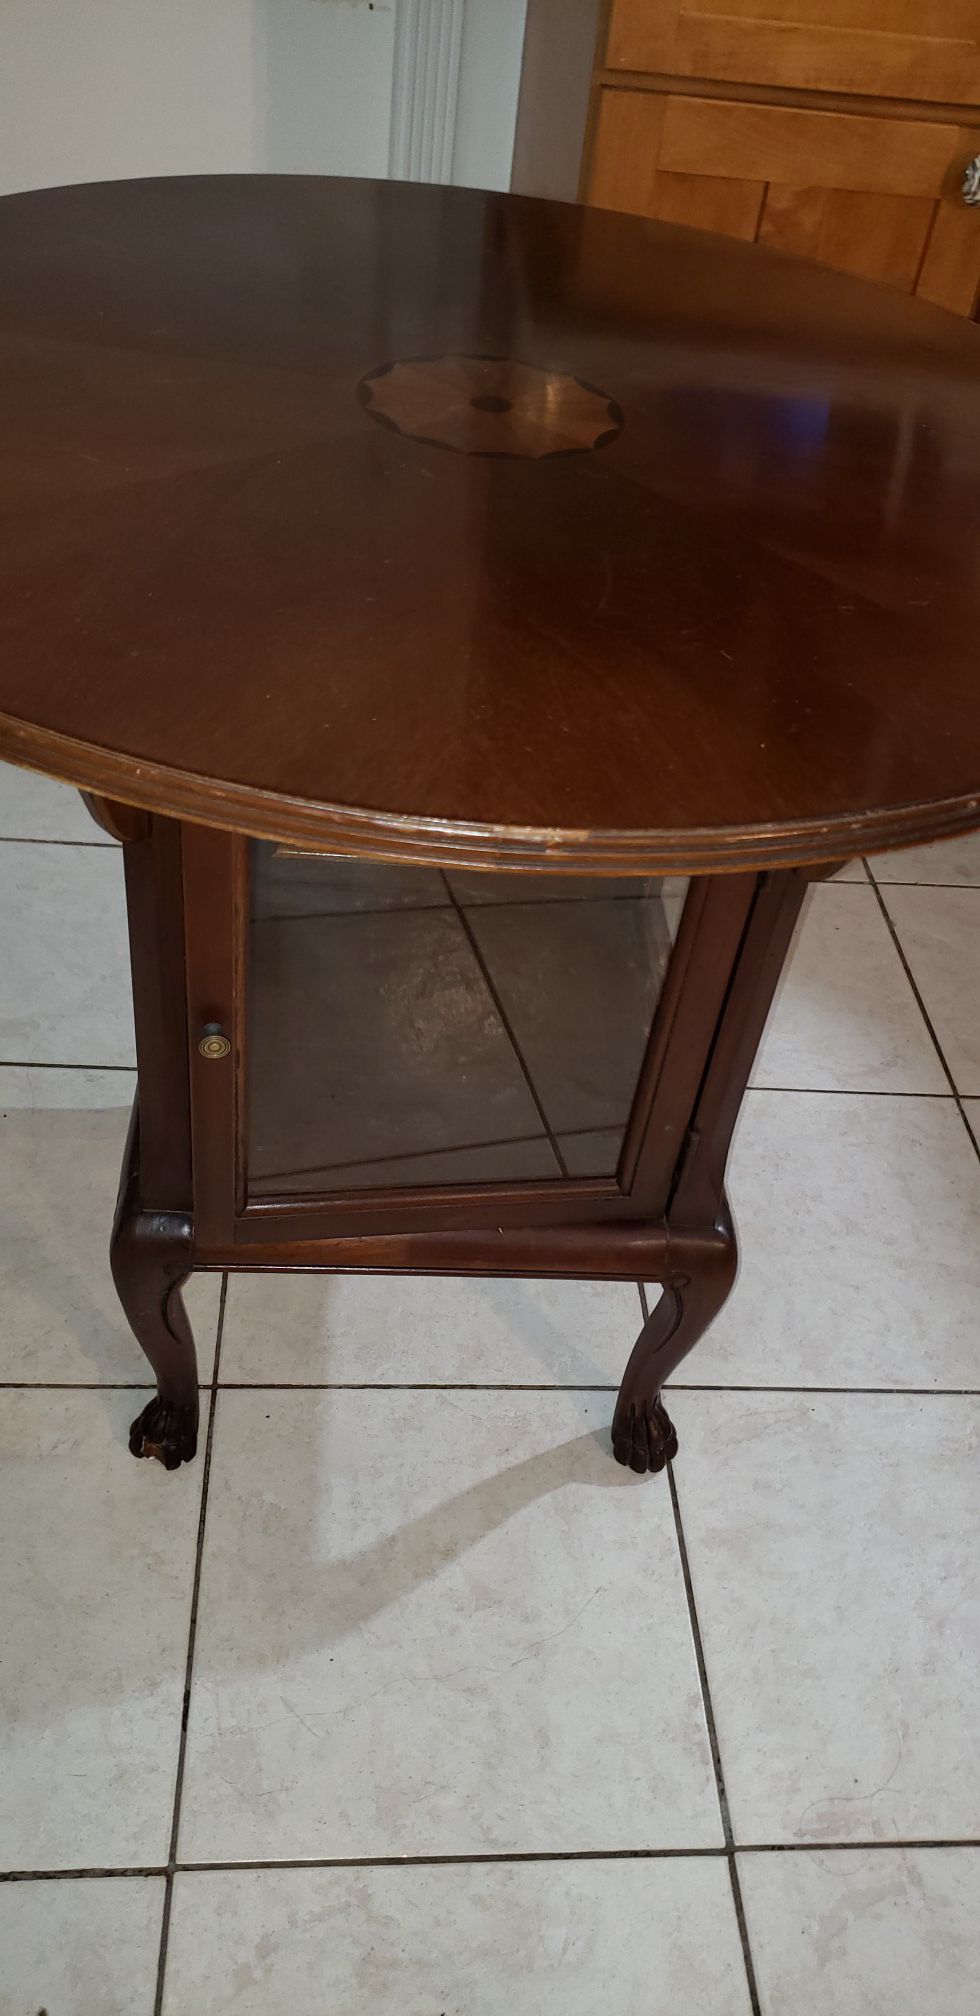 Very nice antique display table